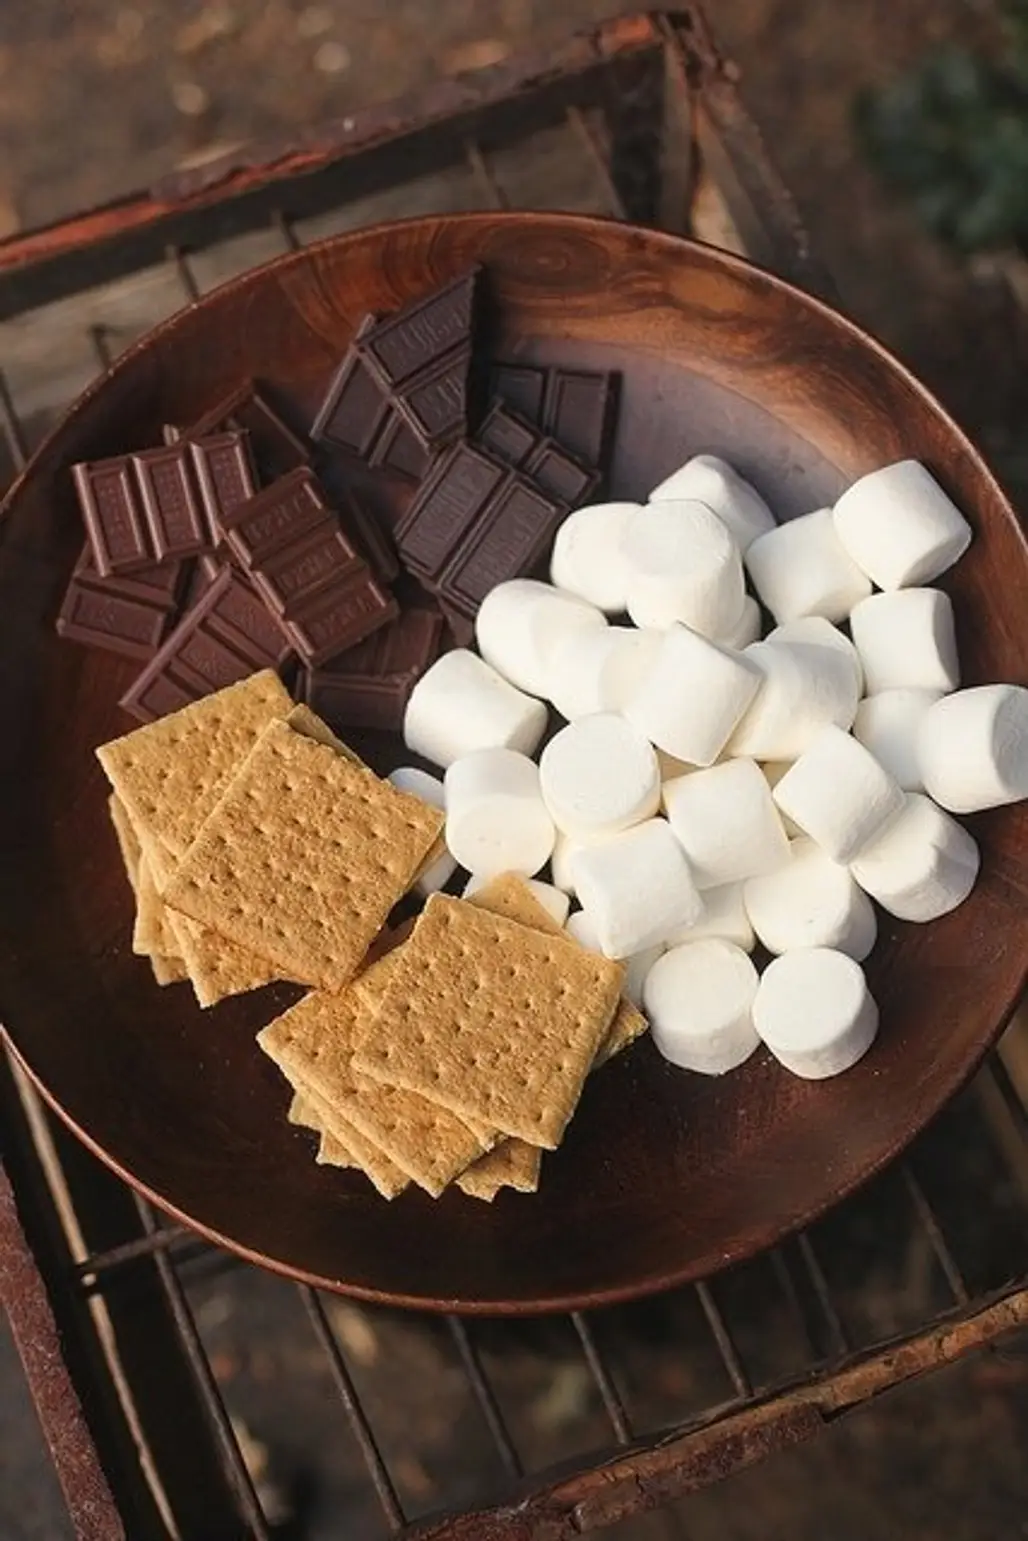 Fireplace S’mores